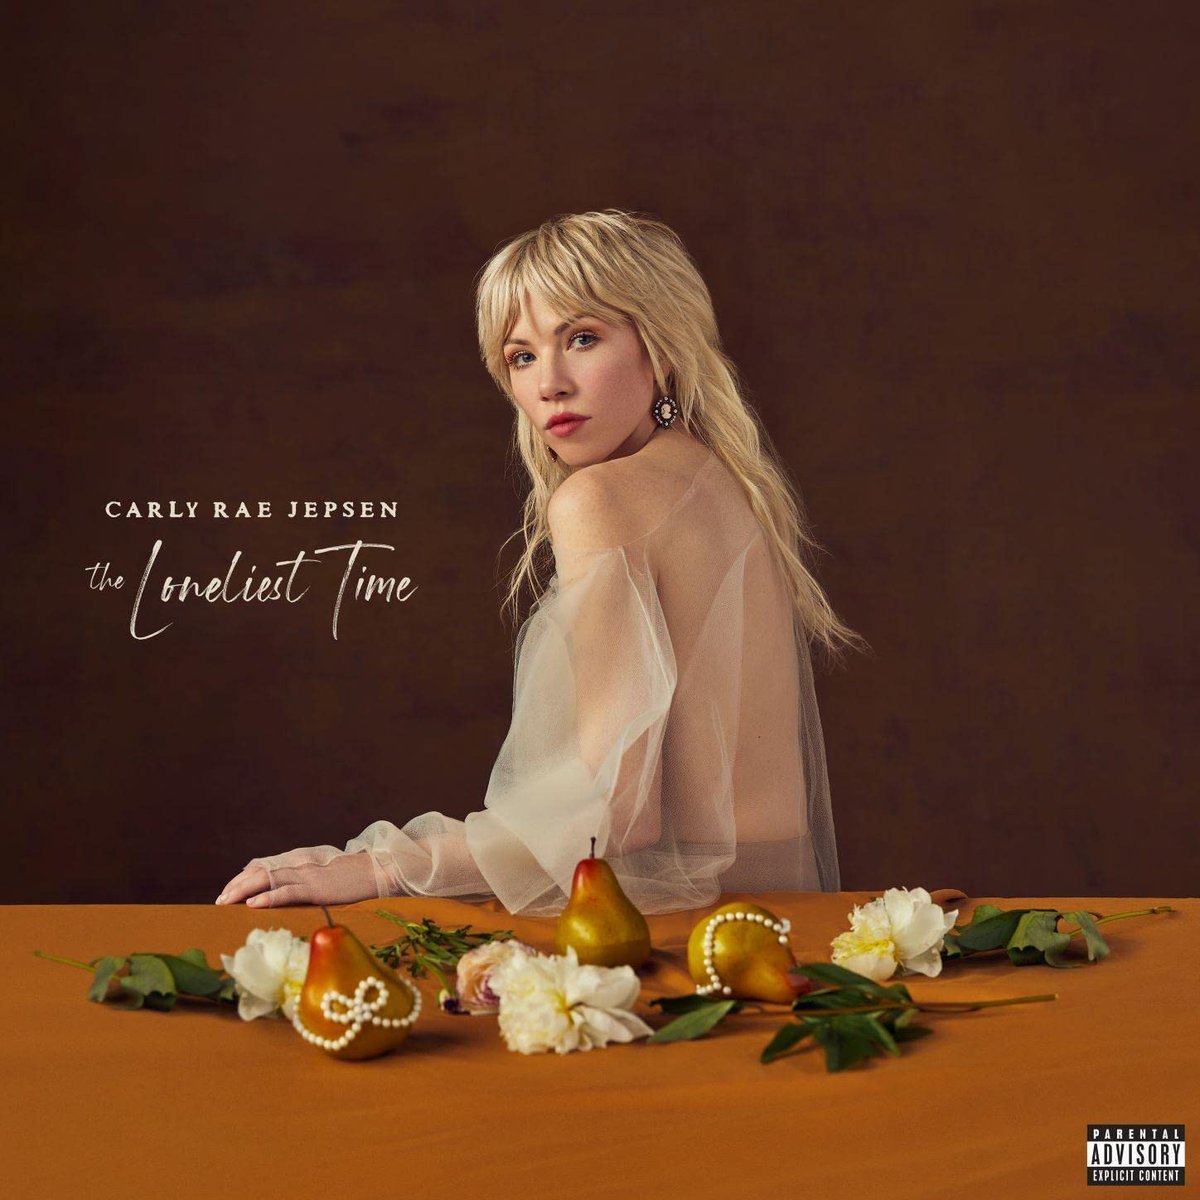 Every brand is talking about 'the album', so I'm going to assume it's Carly Rae Jepsen's The Loneliest Time, because that's the only one that matters right now tbh.